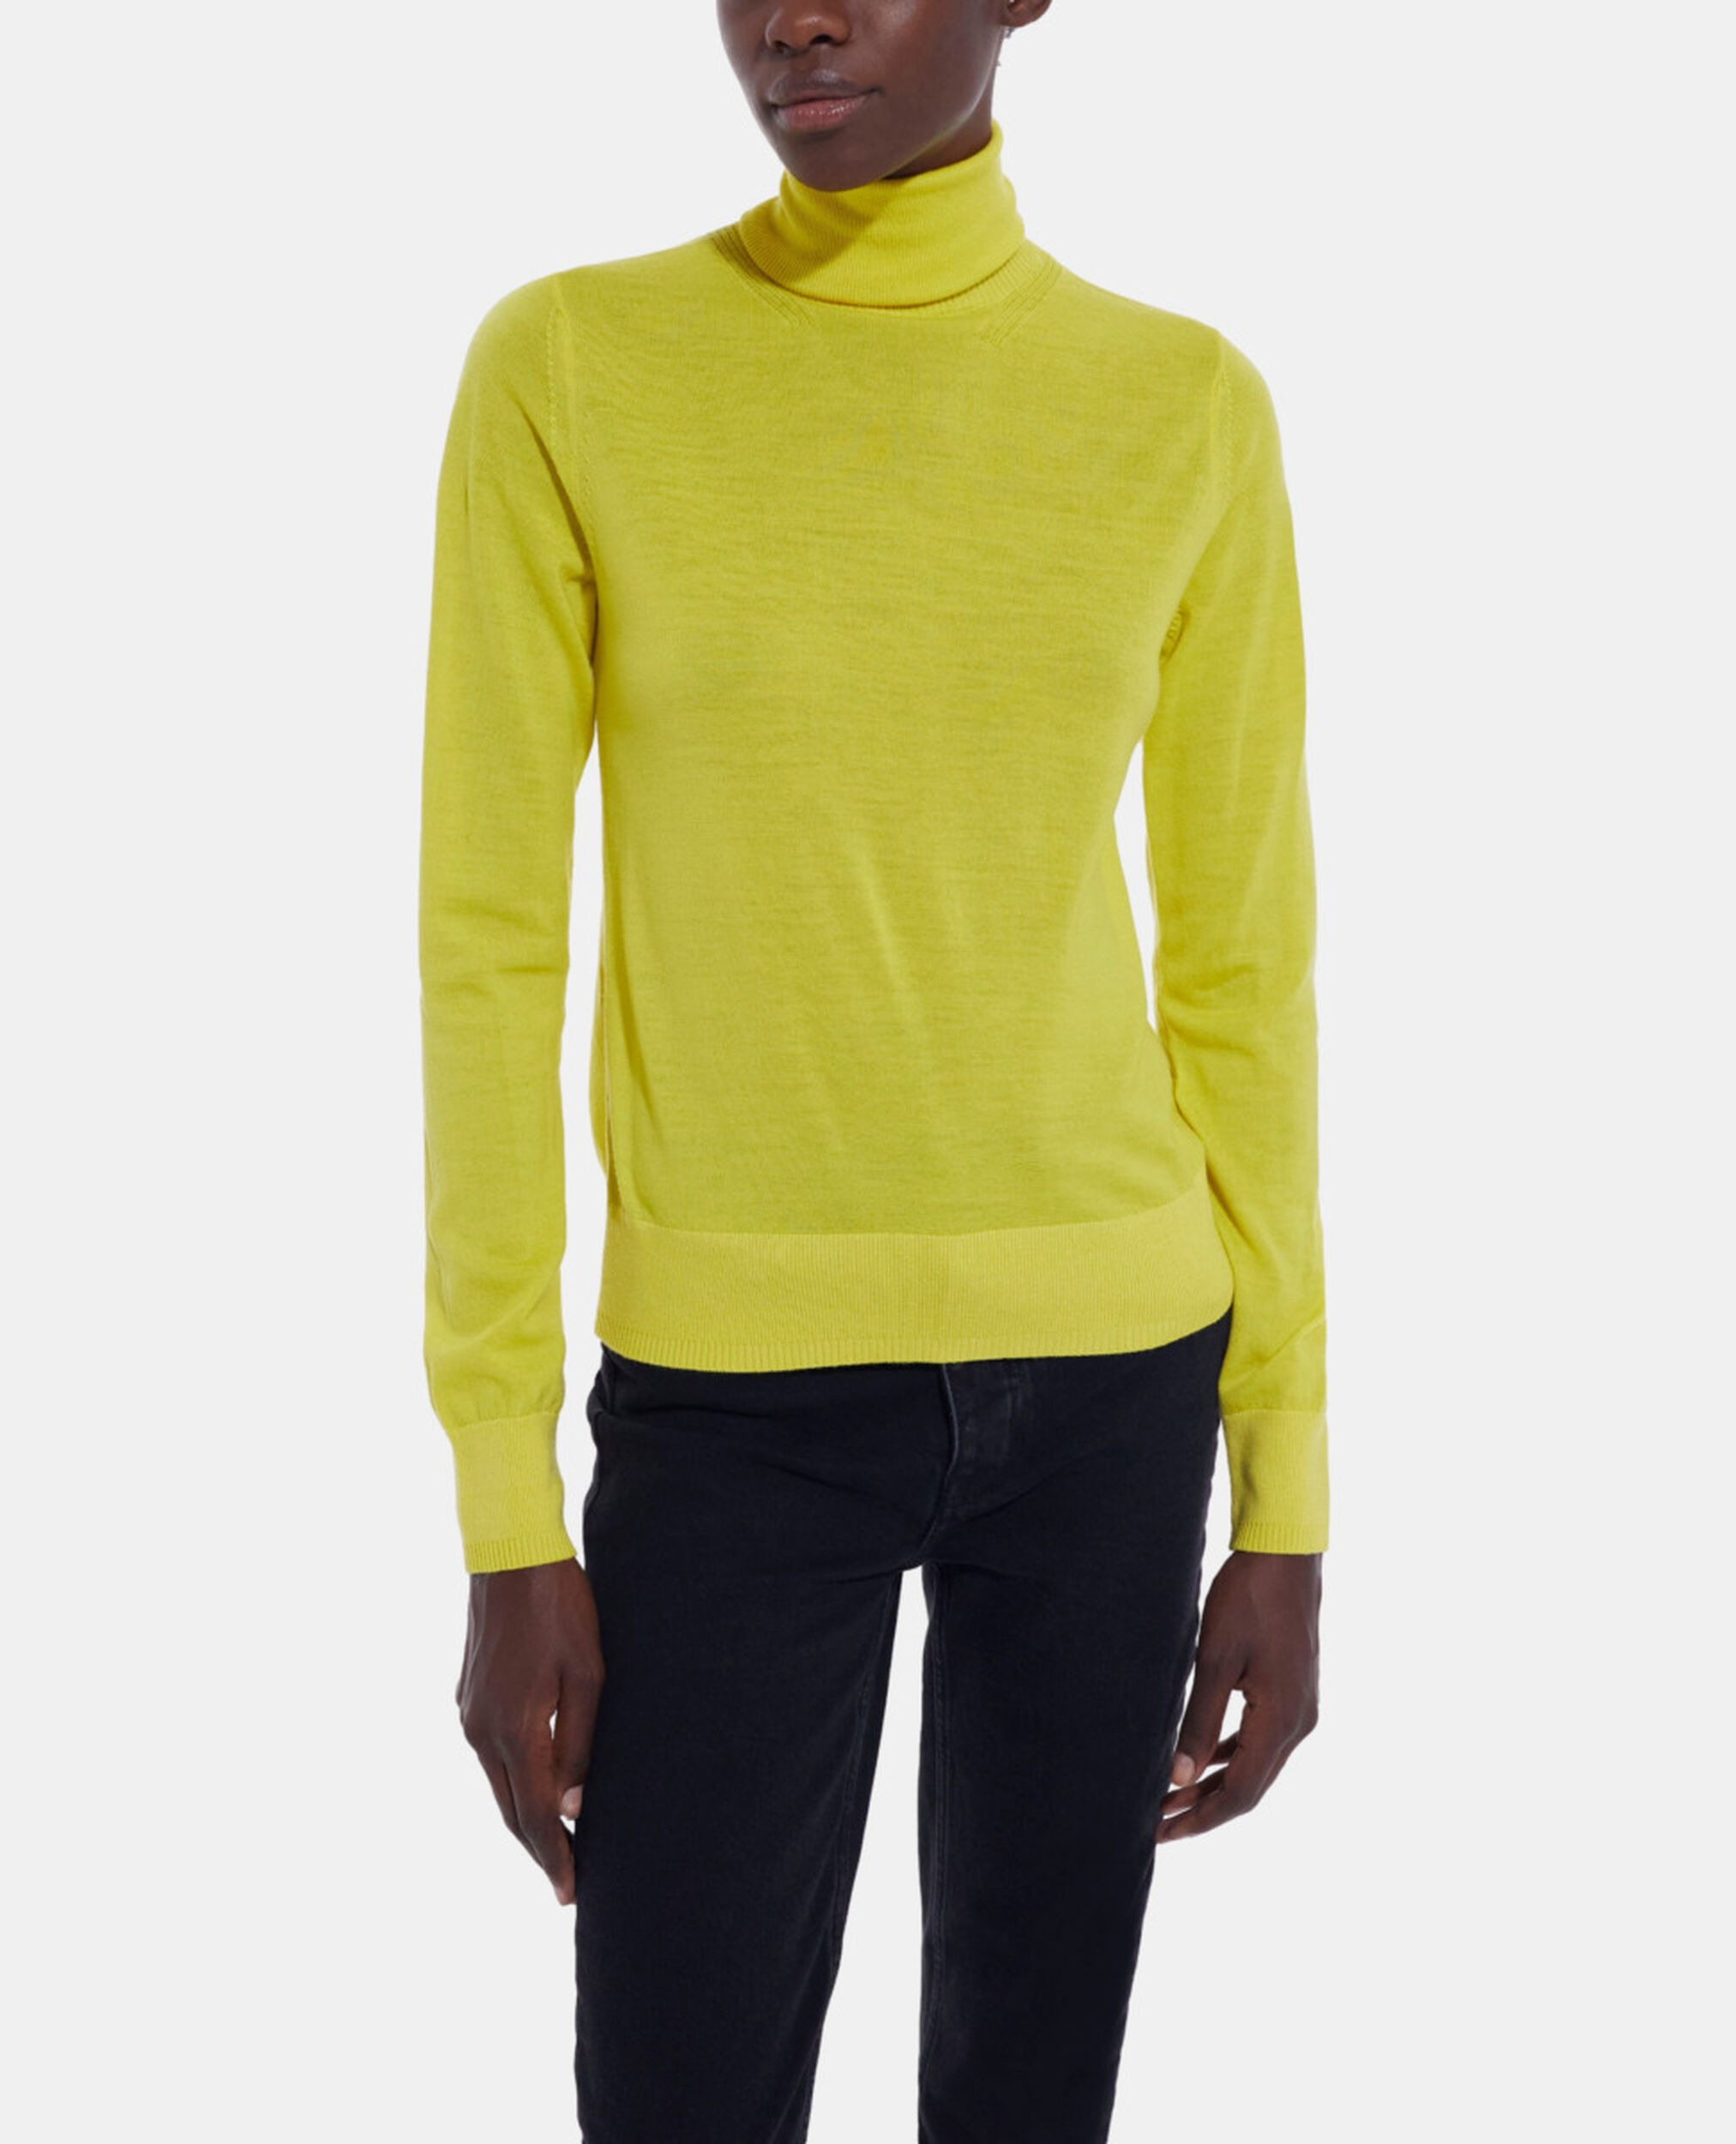 Yellow wool sweater, YELLOW, hi-res image number null